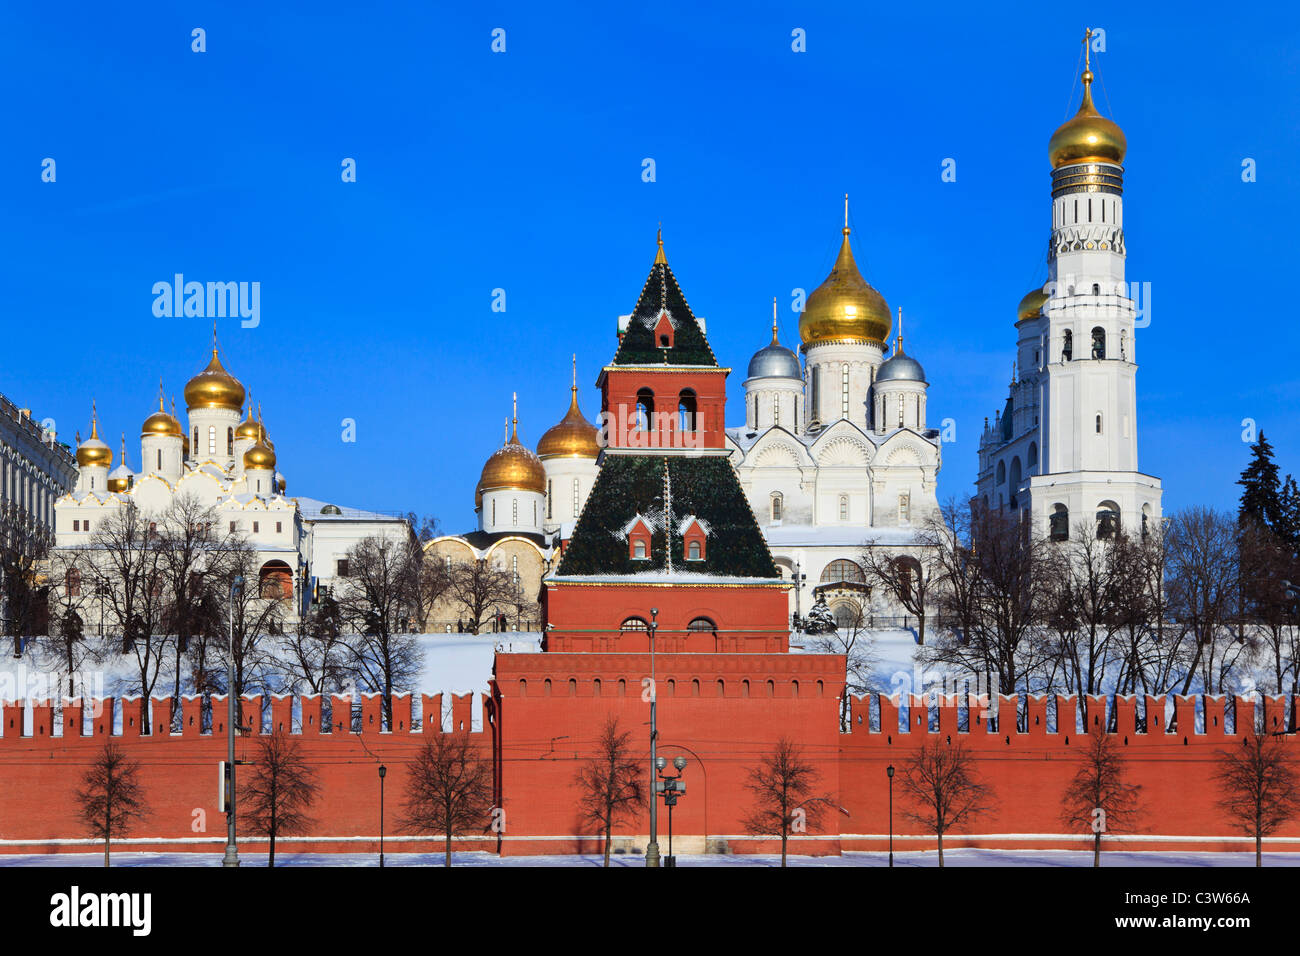 The cathedrals of Moscow Kremlin. Russia. Stock Photo